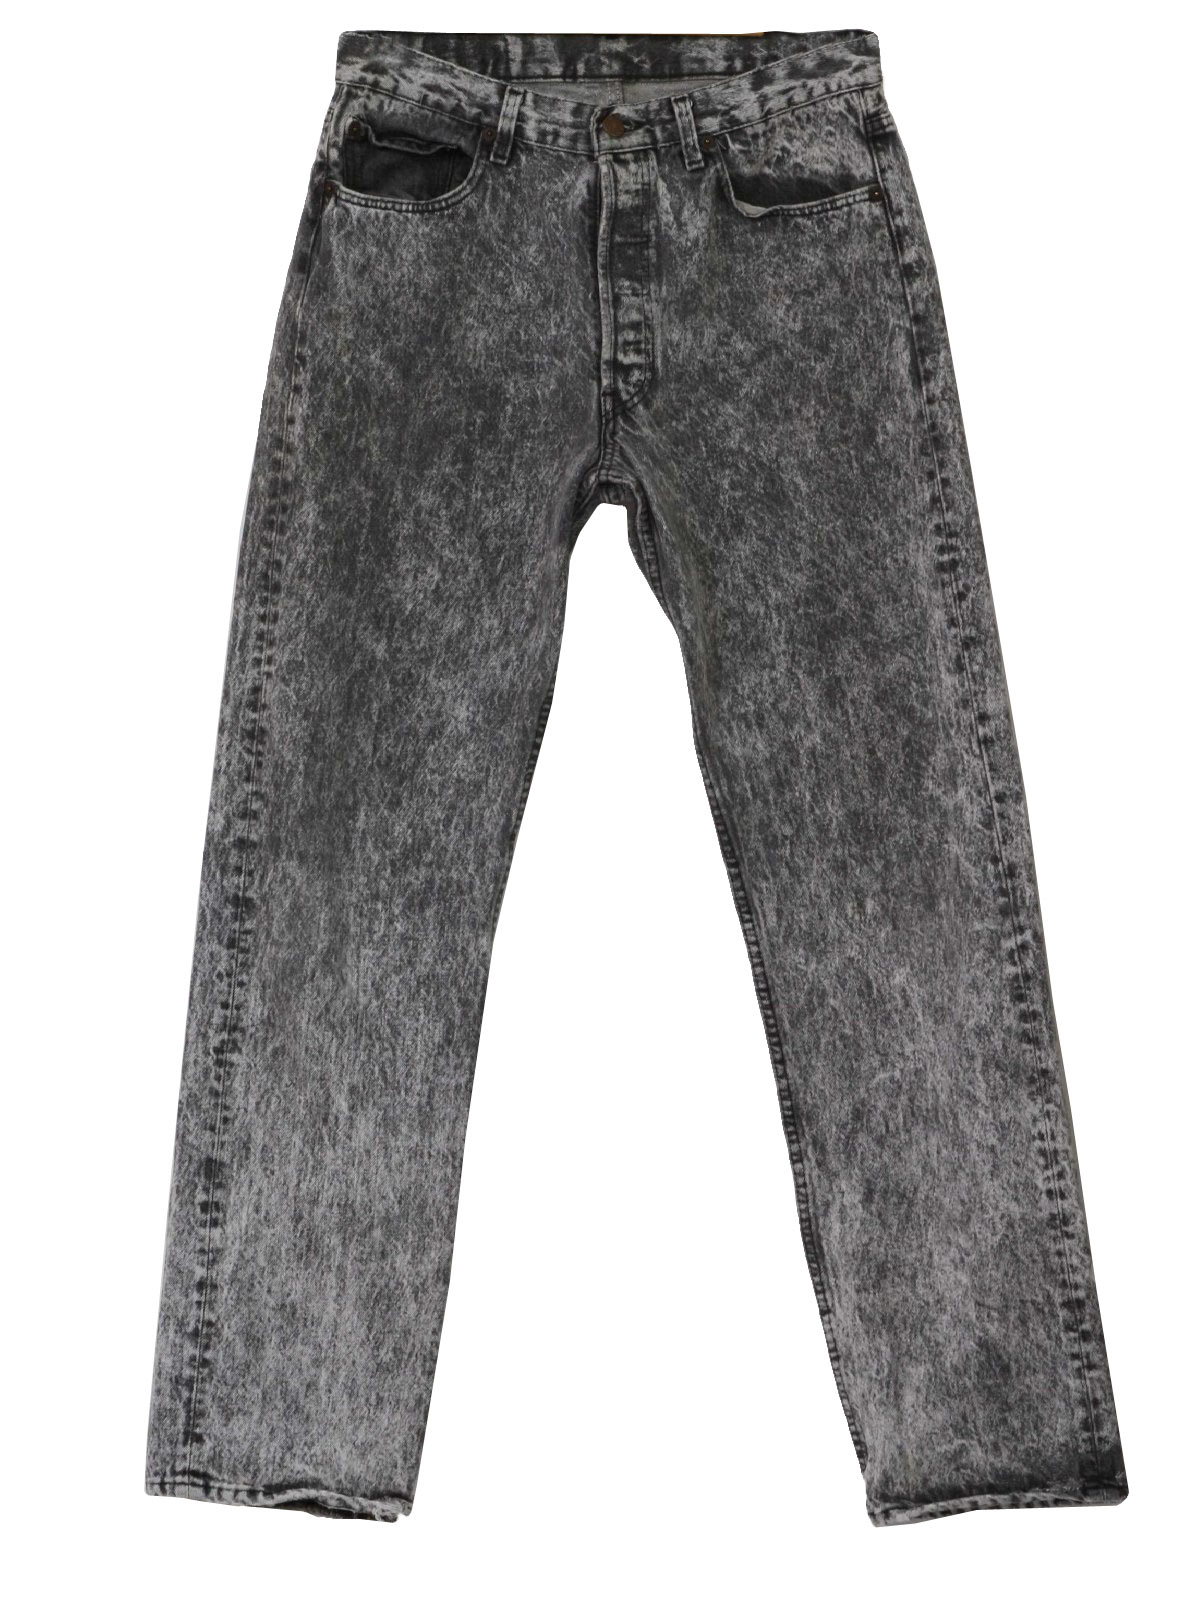 Retro 80's Pants: 80s -Levis 501- Mens shaded grey and black stone wash ...